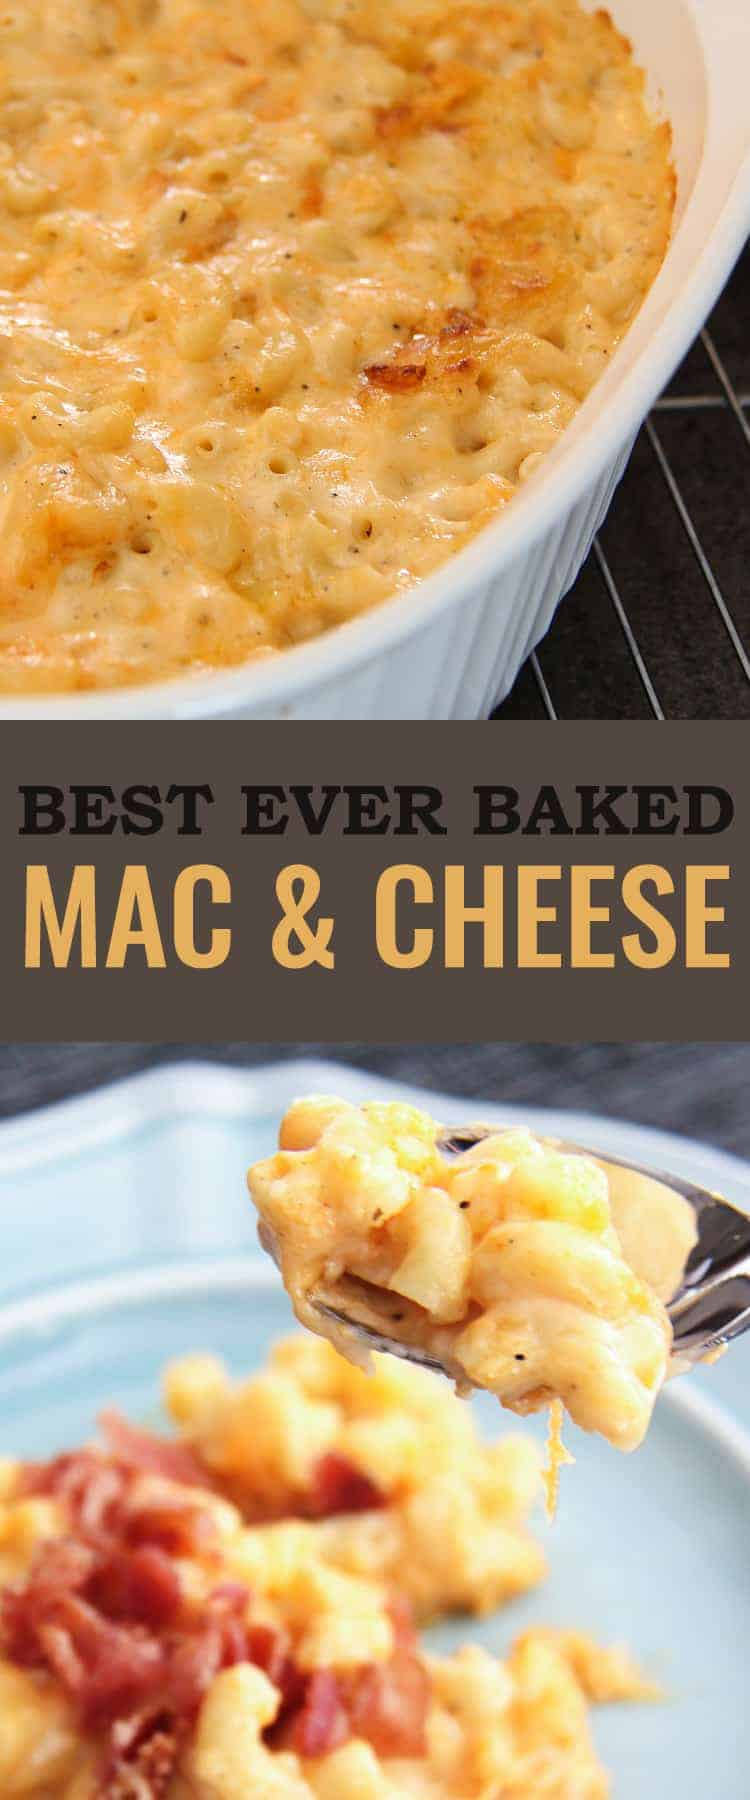 Best Baked Macaroni And Cheese Ever
 The Best Macaroni and Cheese